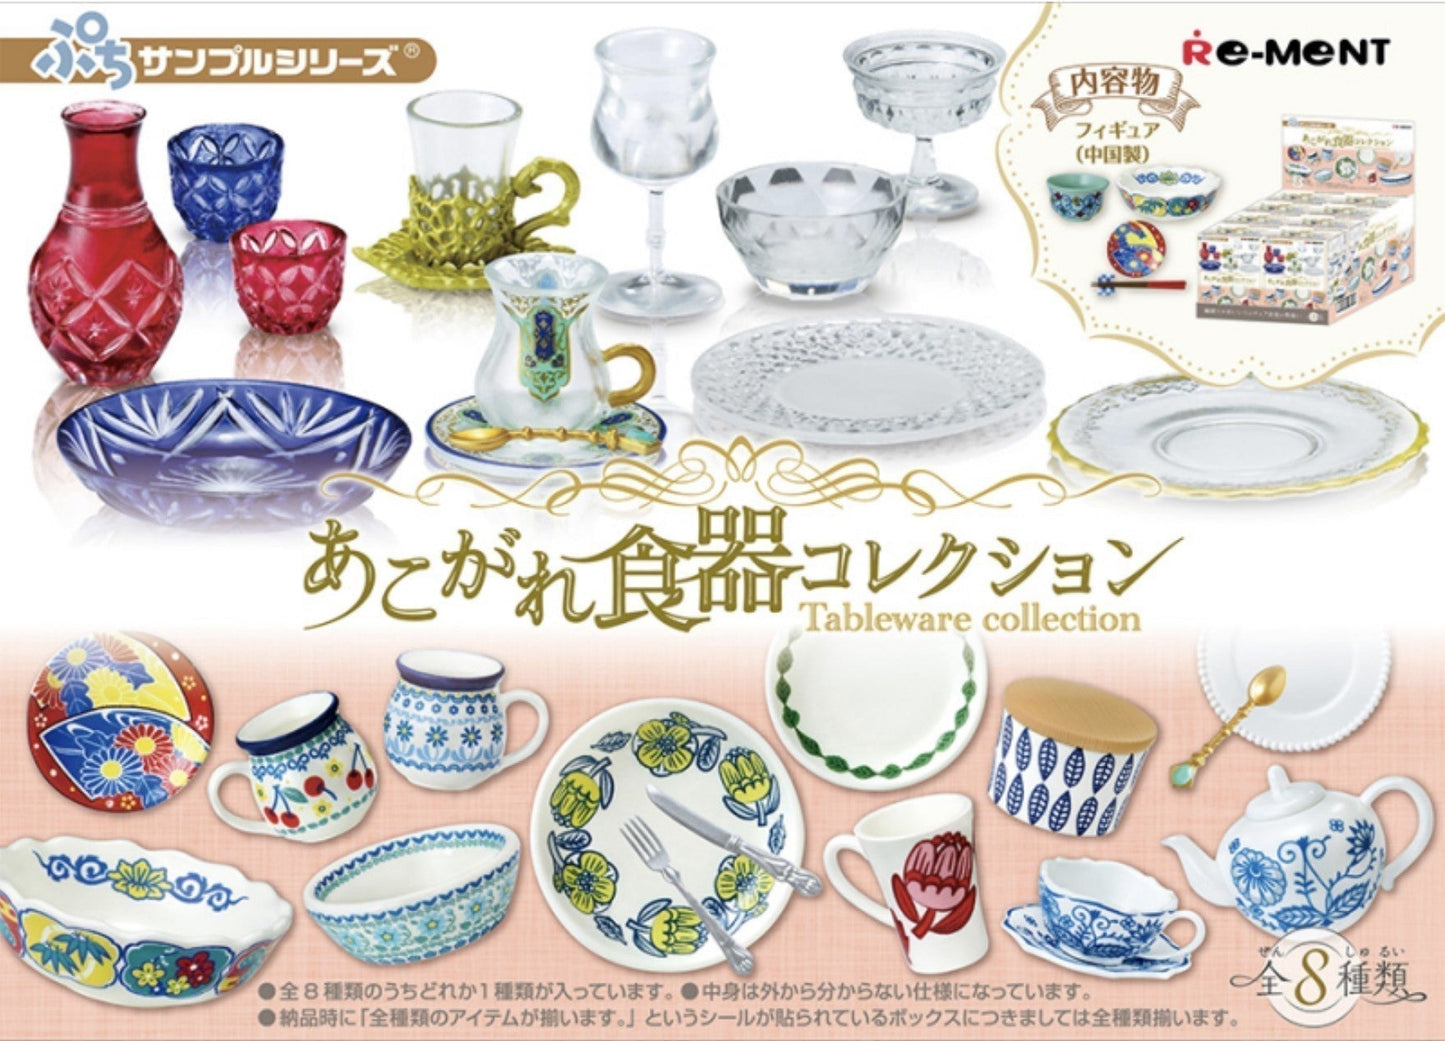 Re-ment Petit Sample Series Miniature Tableware Collection -  No.8